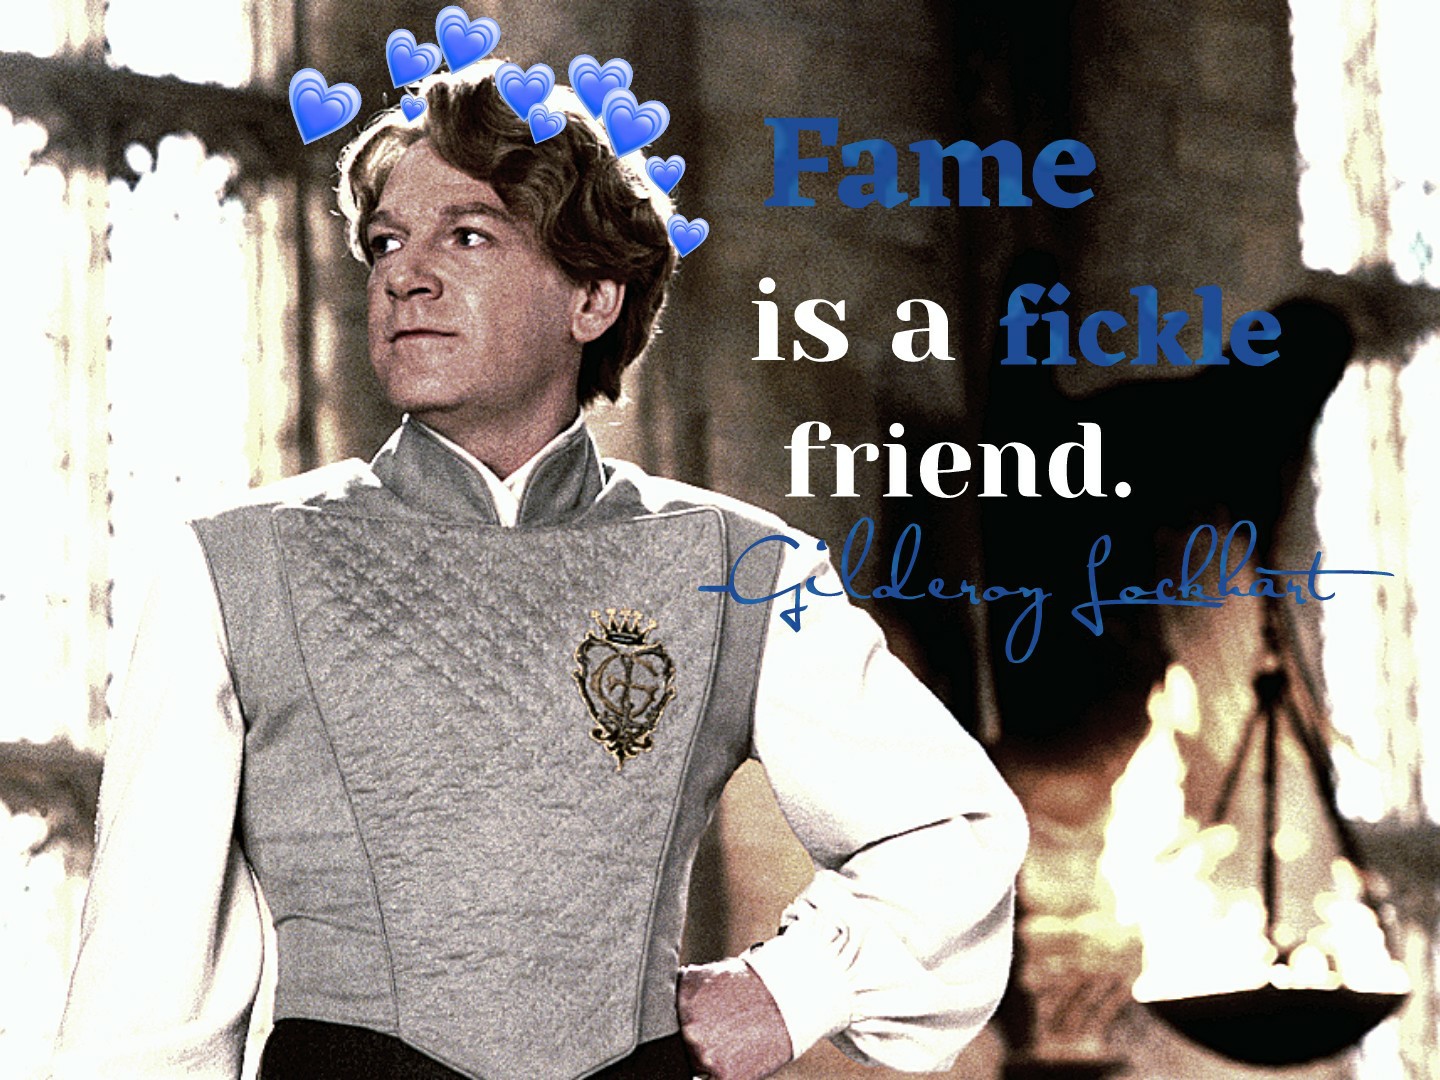 💙Tap💙

IM SO SORRY I HAVENT POSTED IN SO LONG! School is driving me crazy! Yesterday was Gilderoy Lockhart's birthday! I will try to post more often 💙